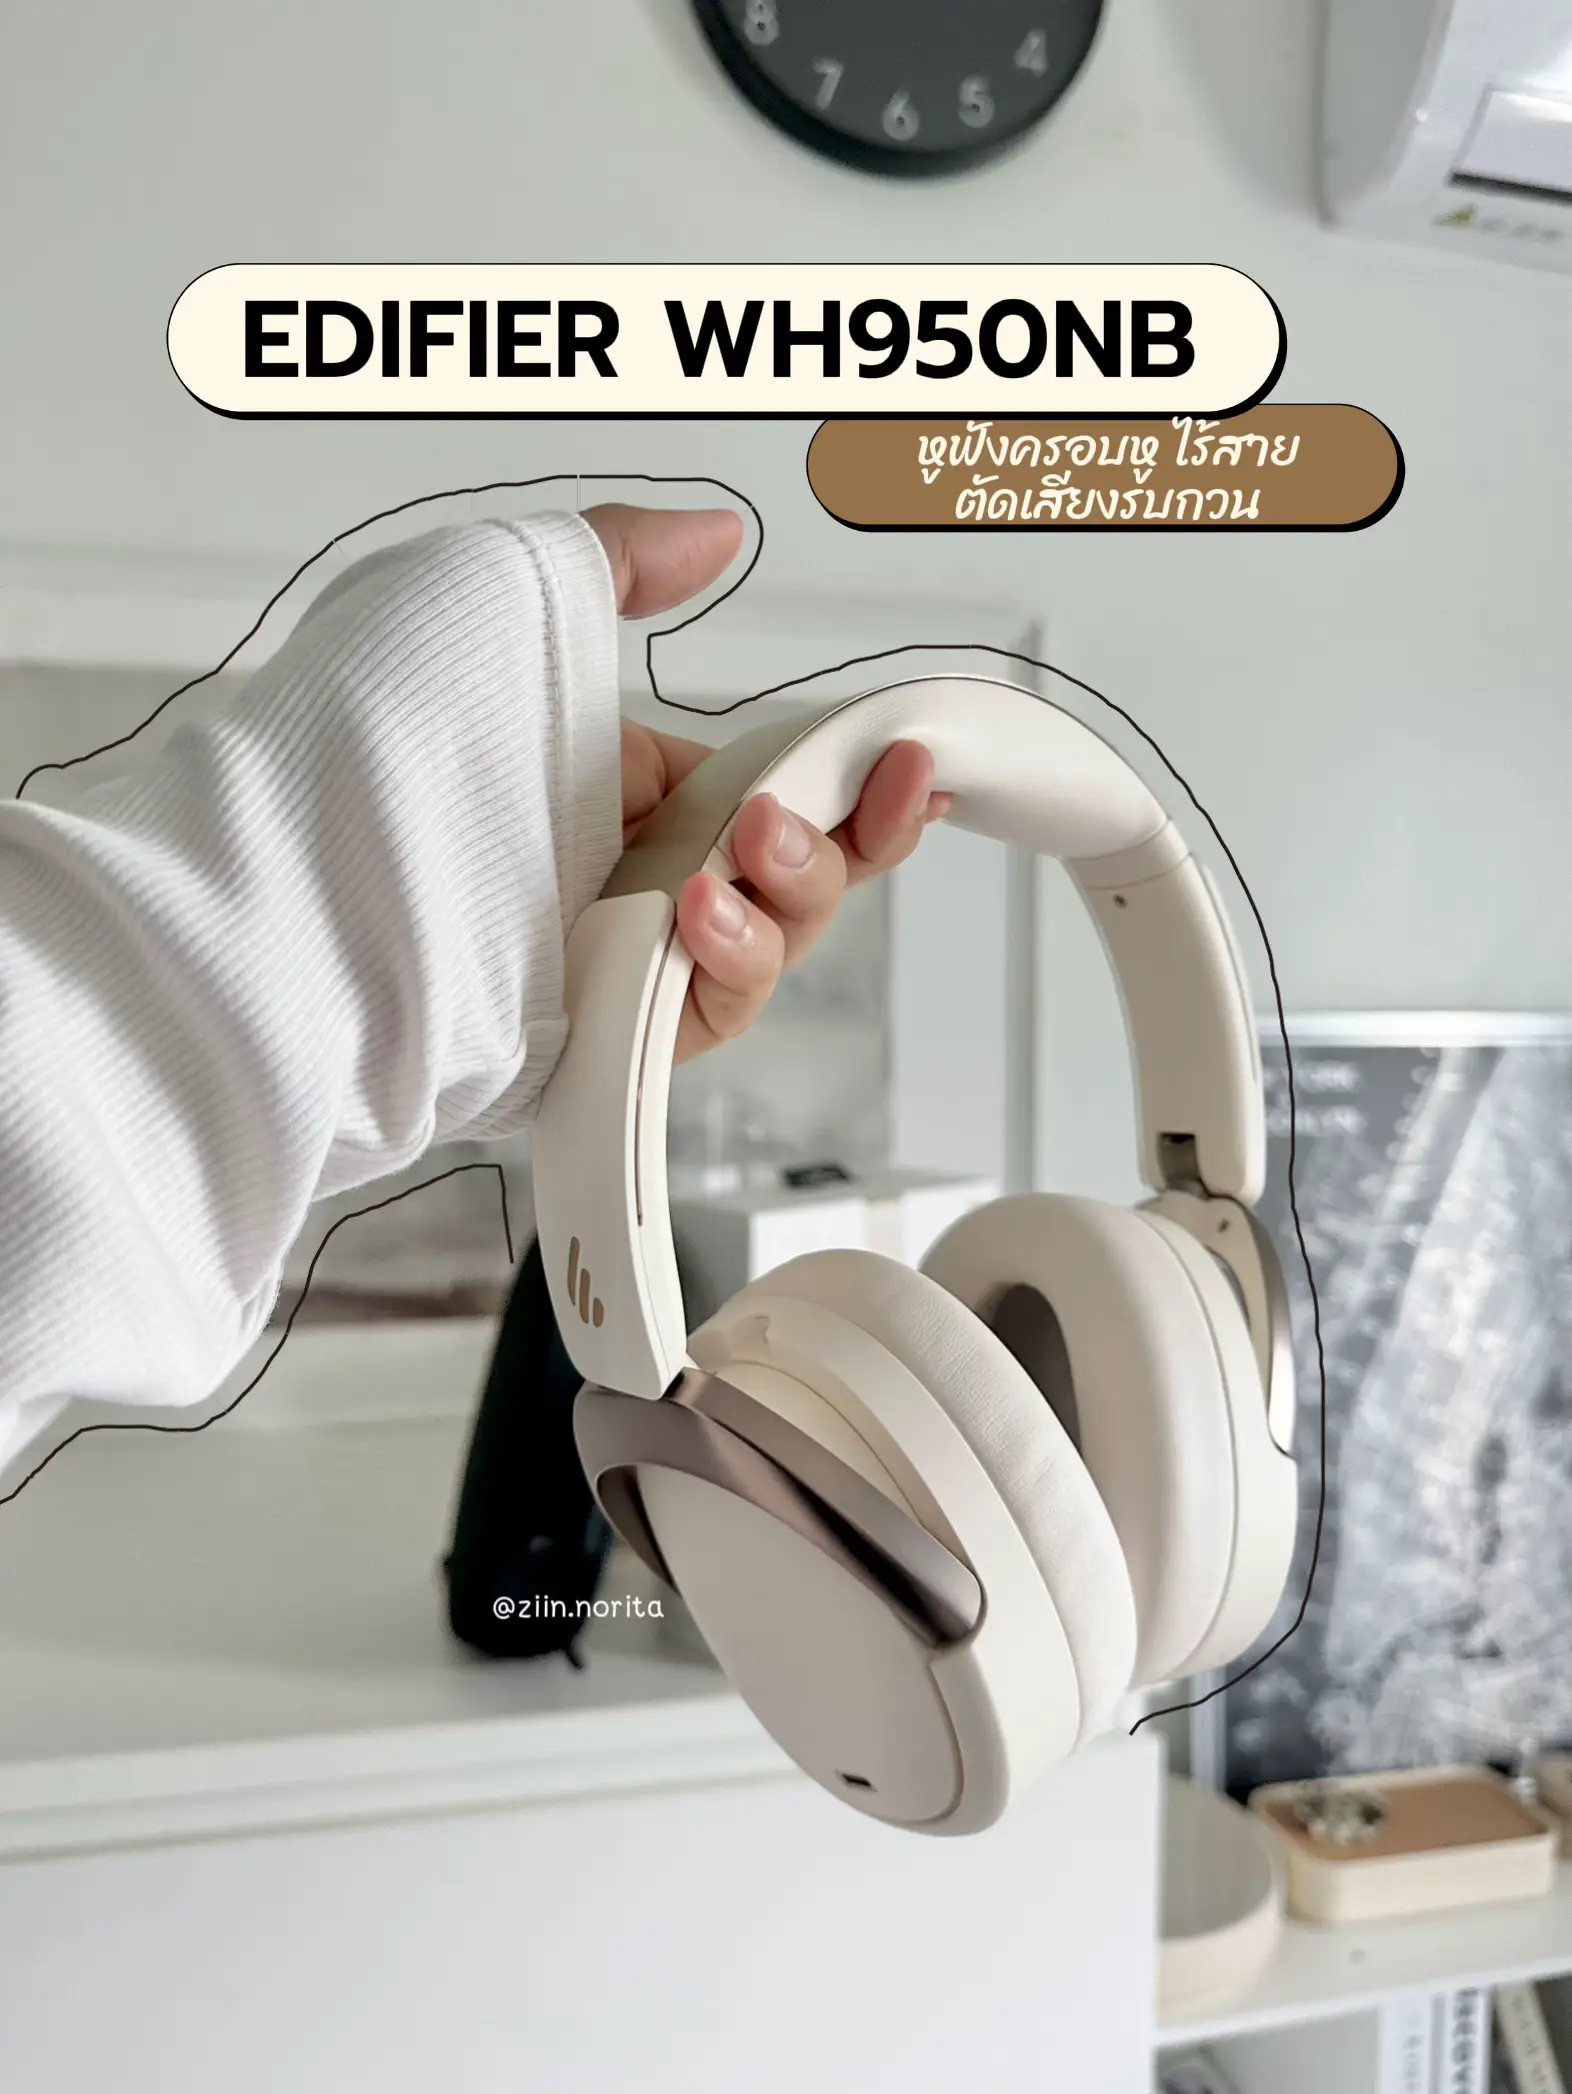 🎧EDIFIER HEADSET REVIEW WH950NB VERSION | Gallery posted by Z